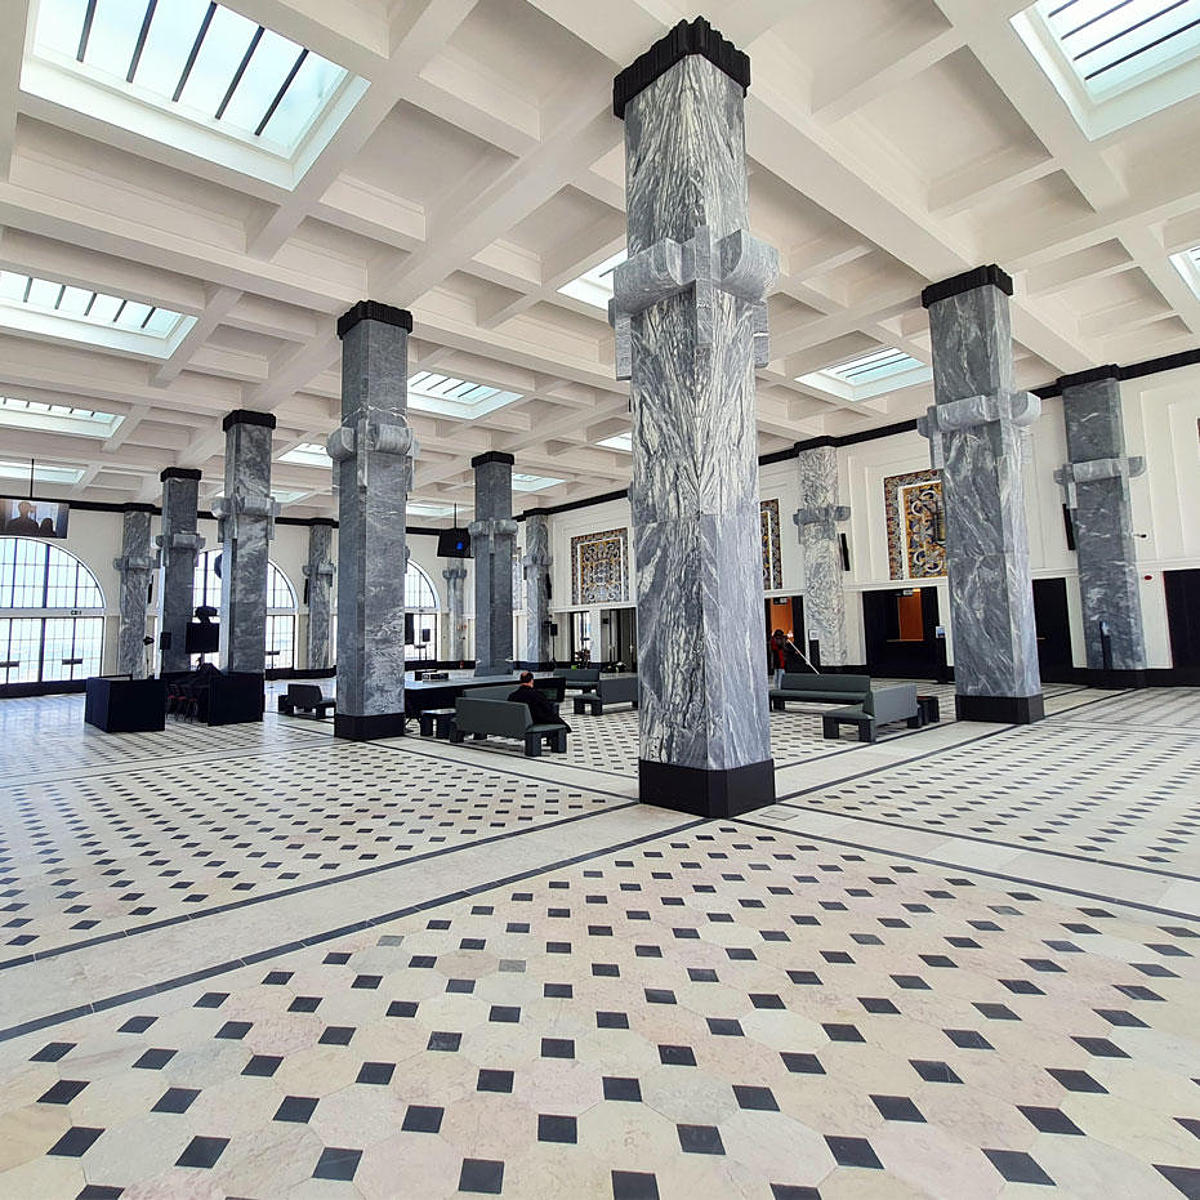 Waiting area with many columns.